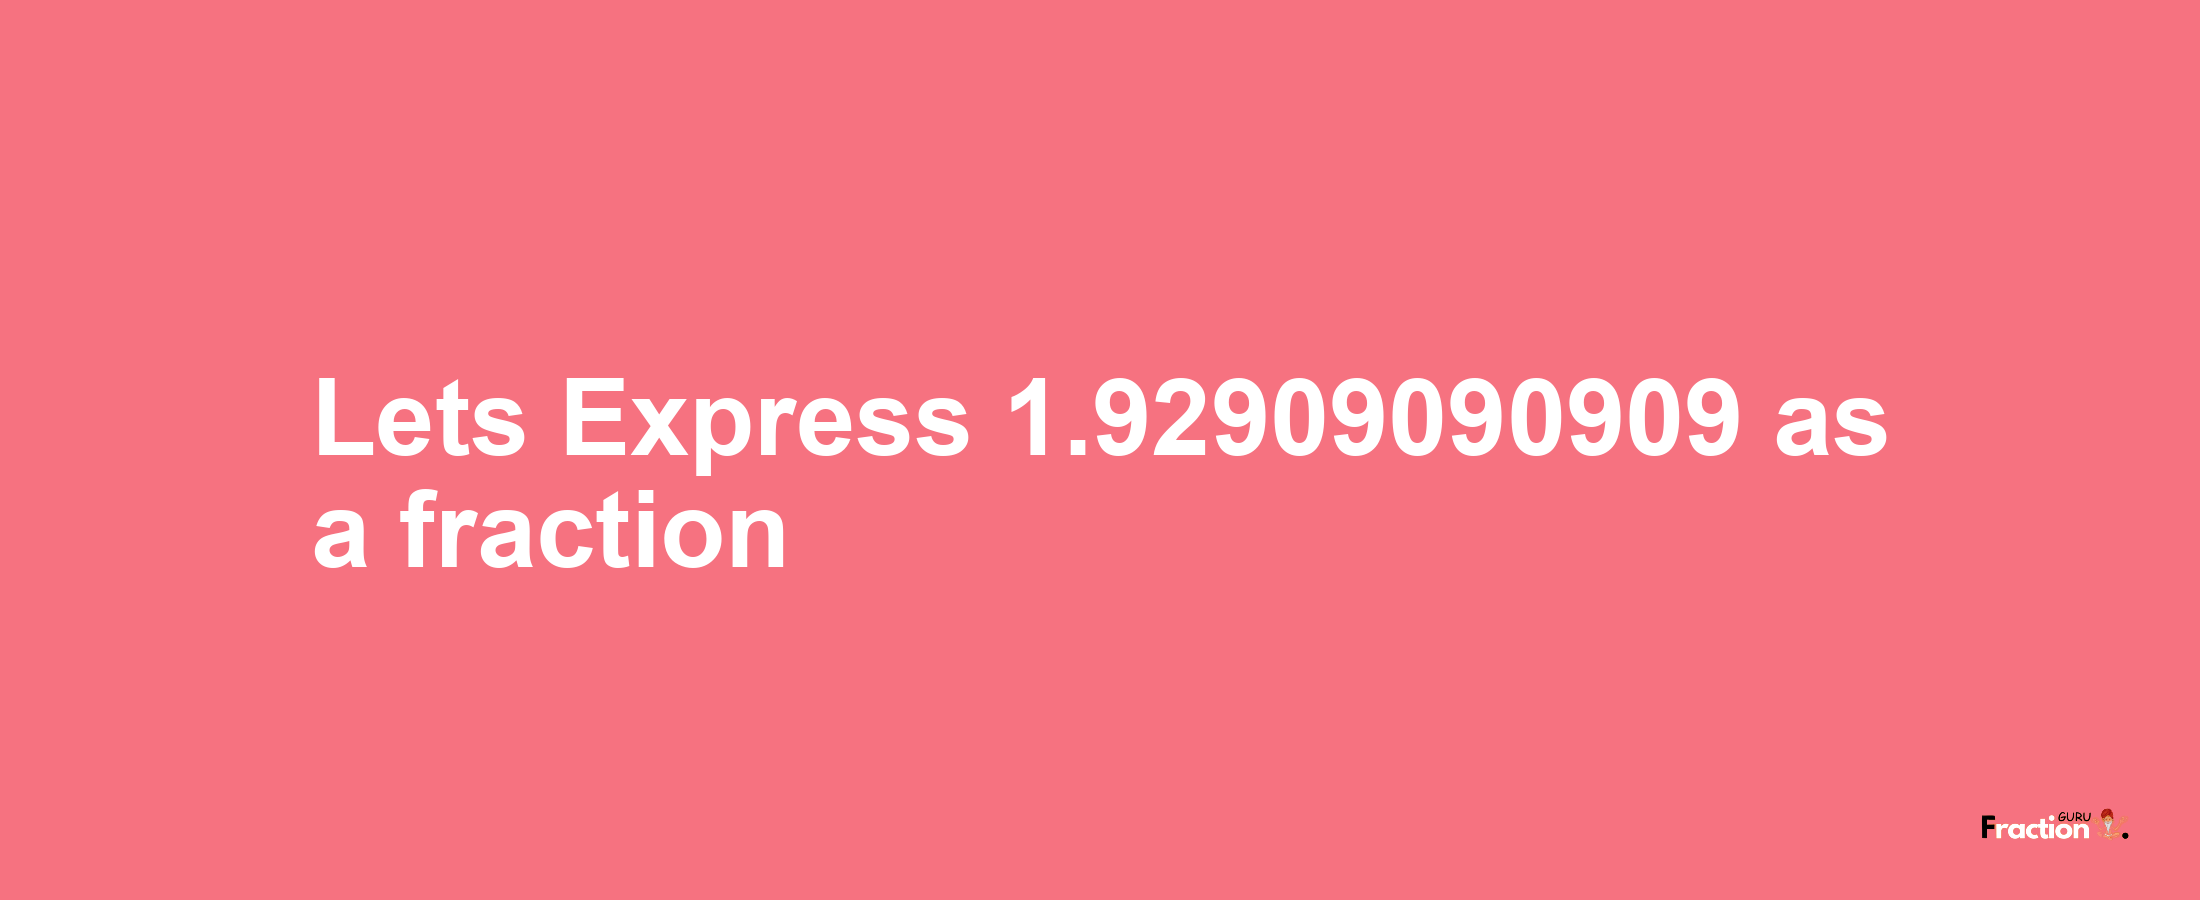 Lets Express 1.92909090909 as afraction